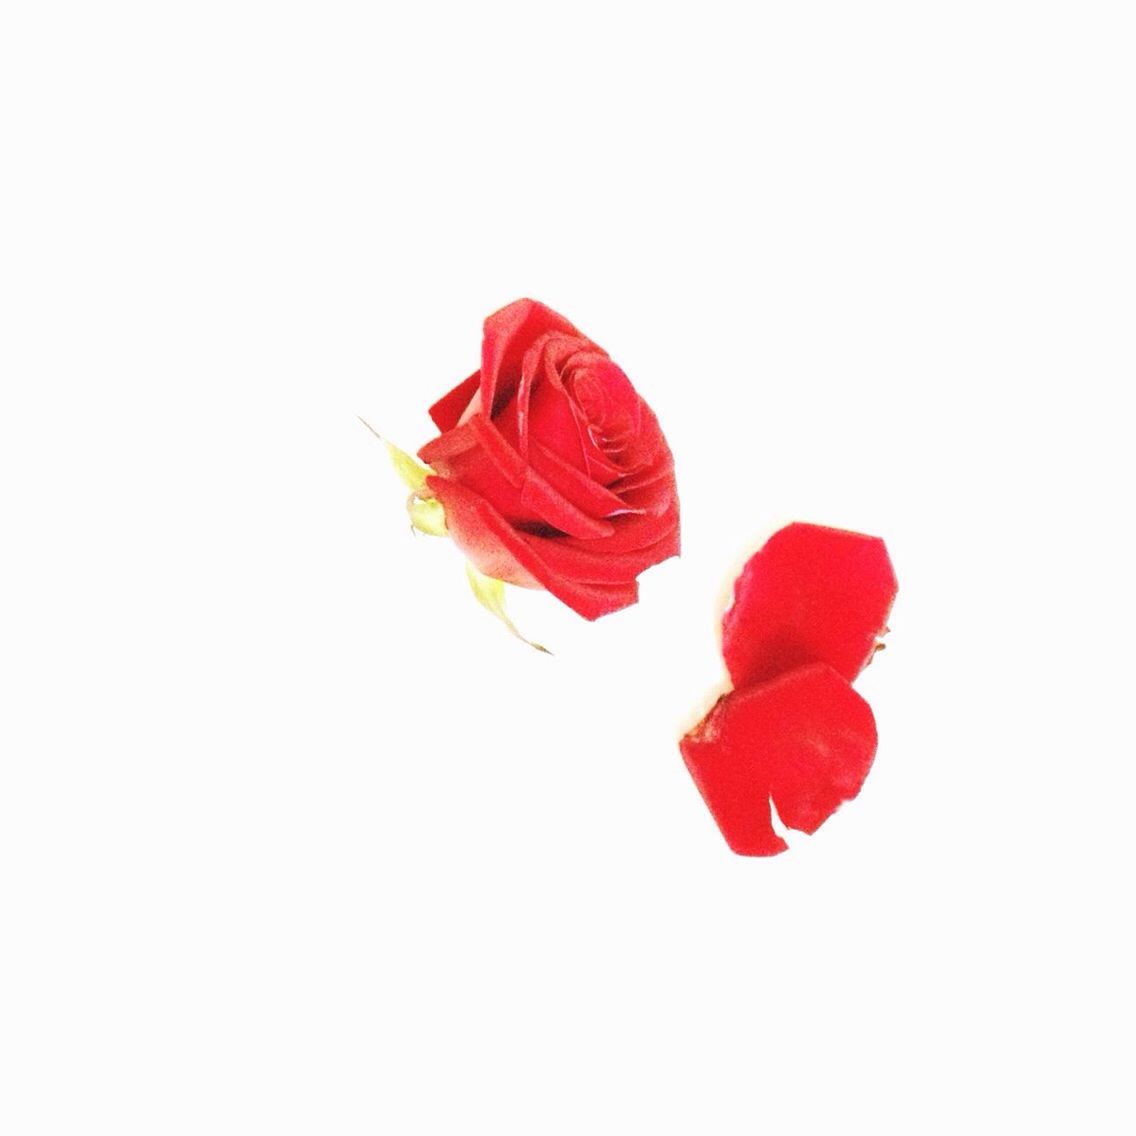 red, studio shot, white background, flower, petal, copy space, freshness, fragility, rose - flower, flower head, close-up, beauty in nature, cut out, single flower, nature, stem, no people, rose, vibrant color, single object